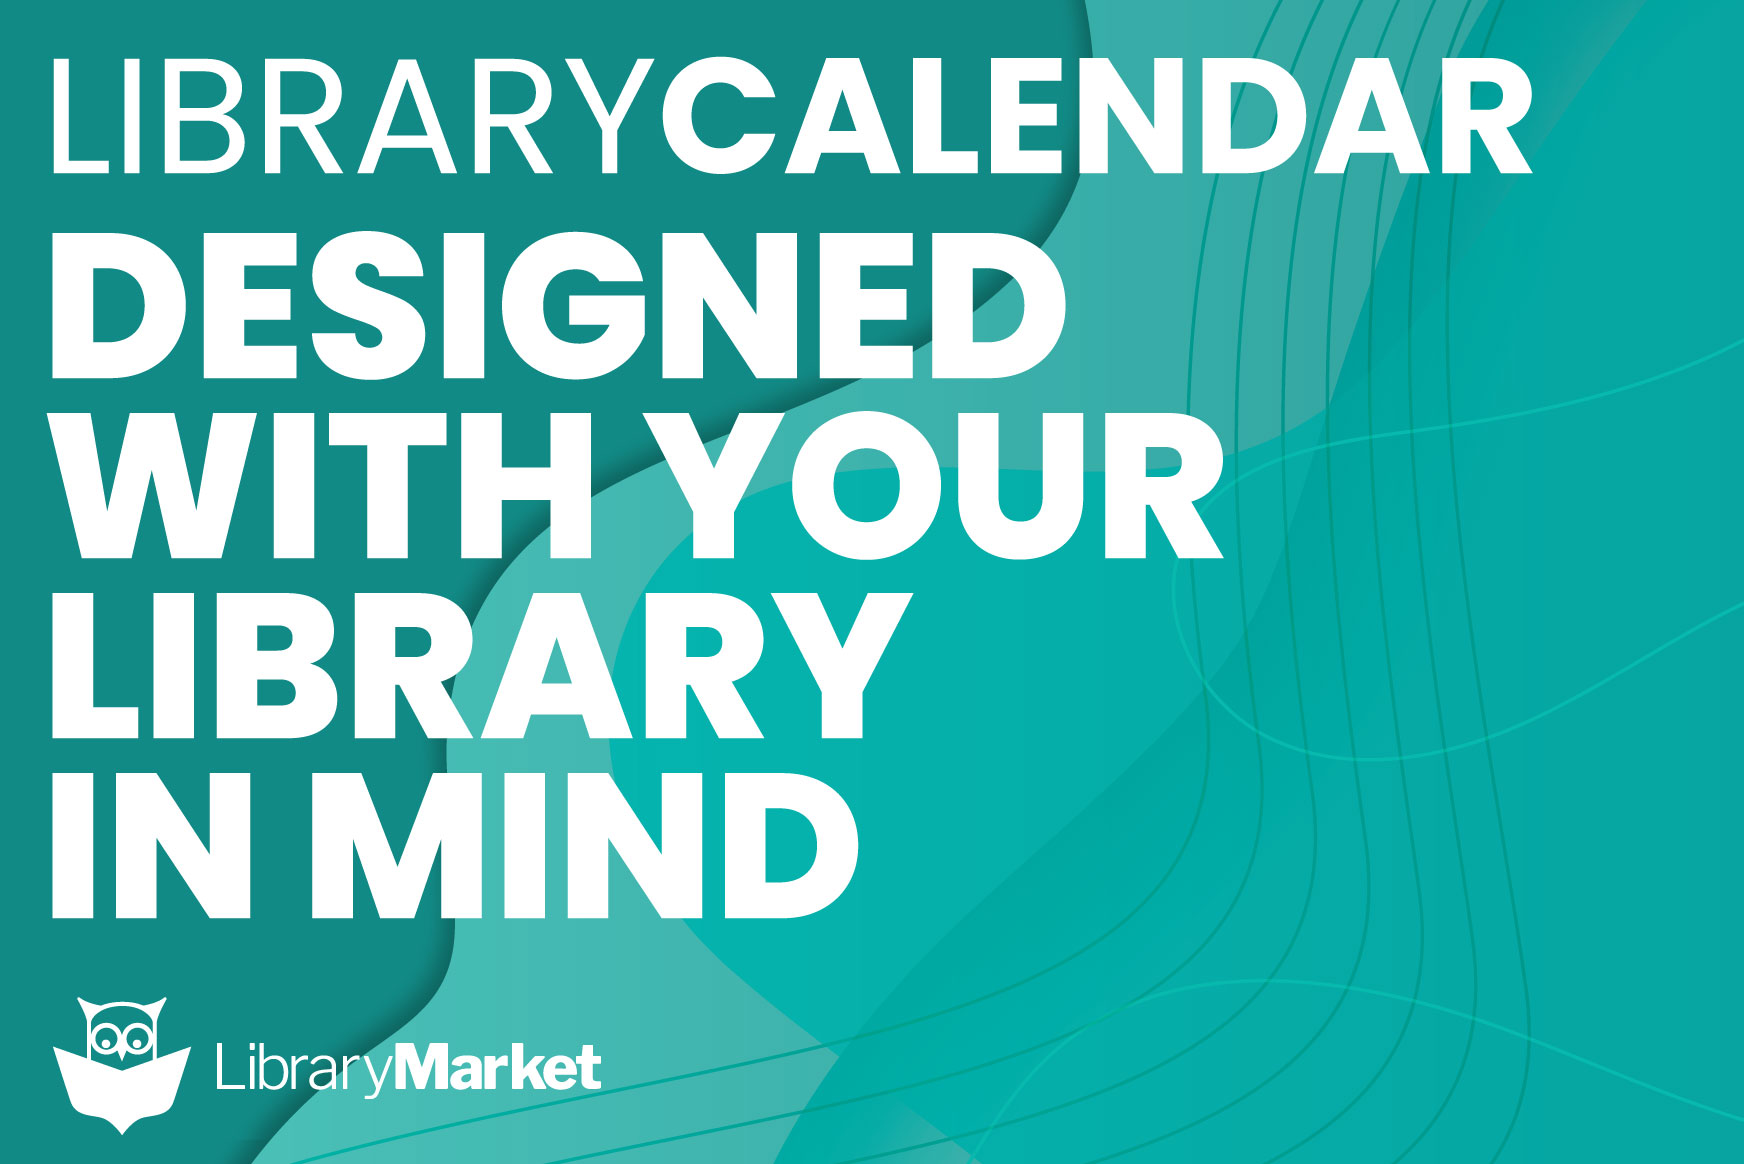 LibraryCalendar: Designed with Your Library in Mind